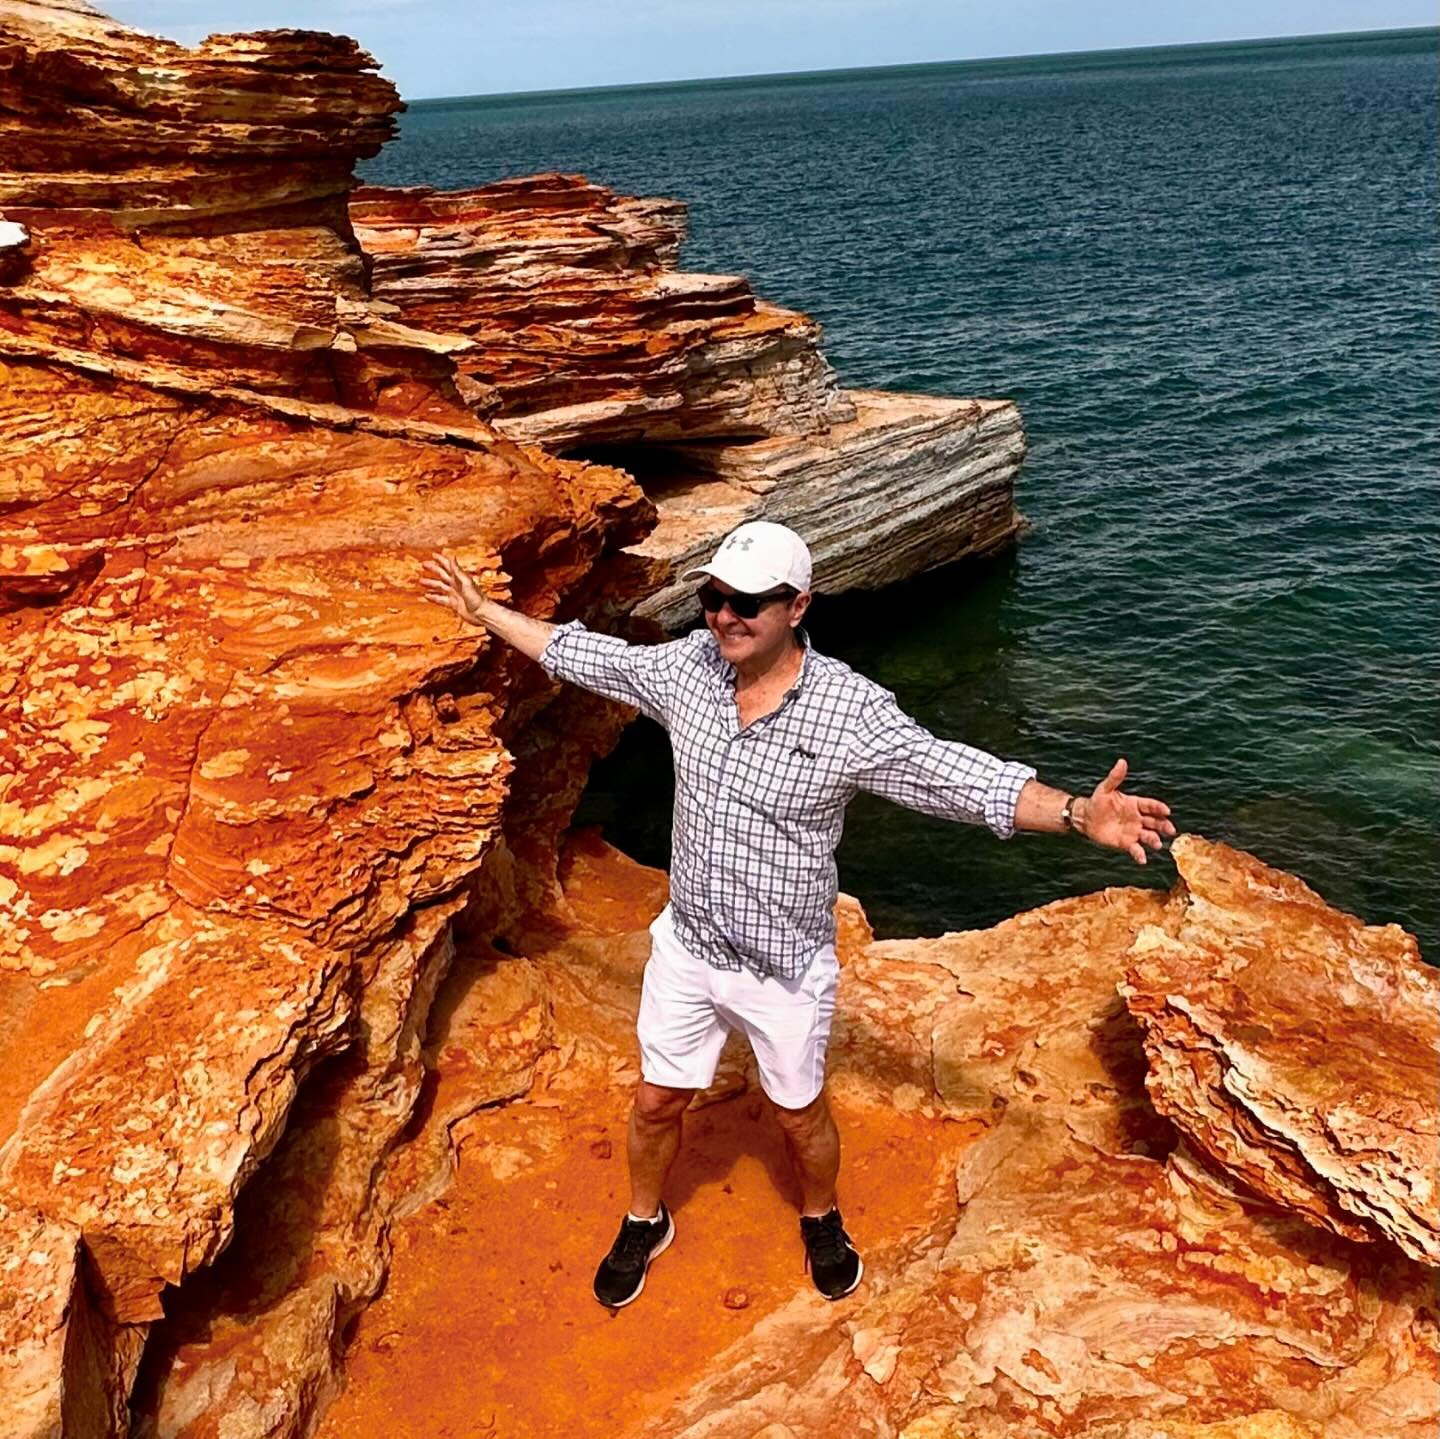 In search of precious moments and experiences 🎯🍀🚌 
culture, history, art, pearls, so much more, and all that Broome is, underneath its beauty.

A sneak preview of more to come.

Michael, Marty and Leslie 🍀🍀🌍🇺🇸

Pat @mayiharvestsnativefoods 
P